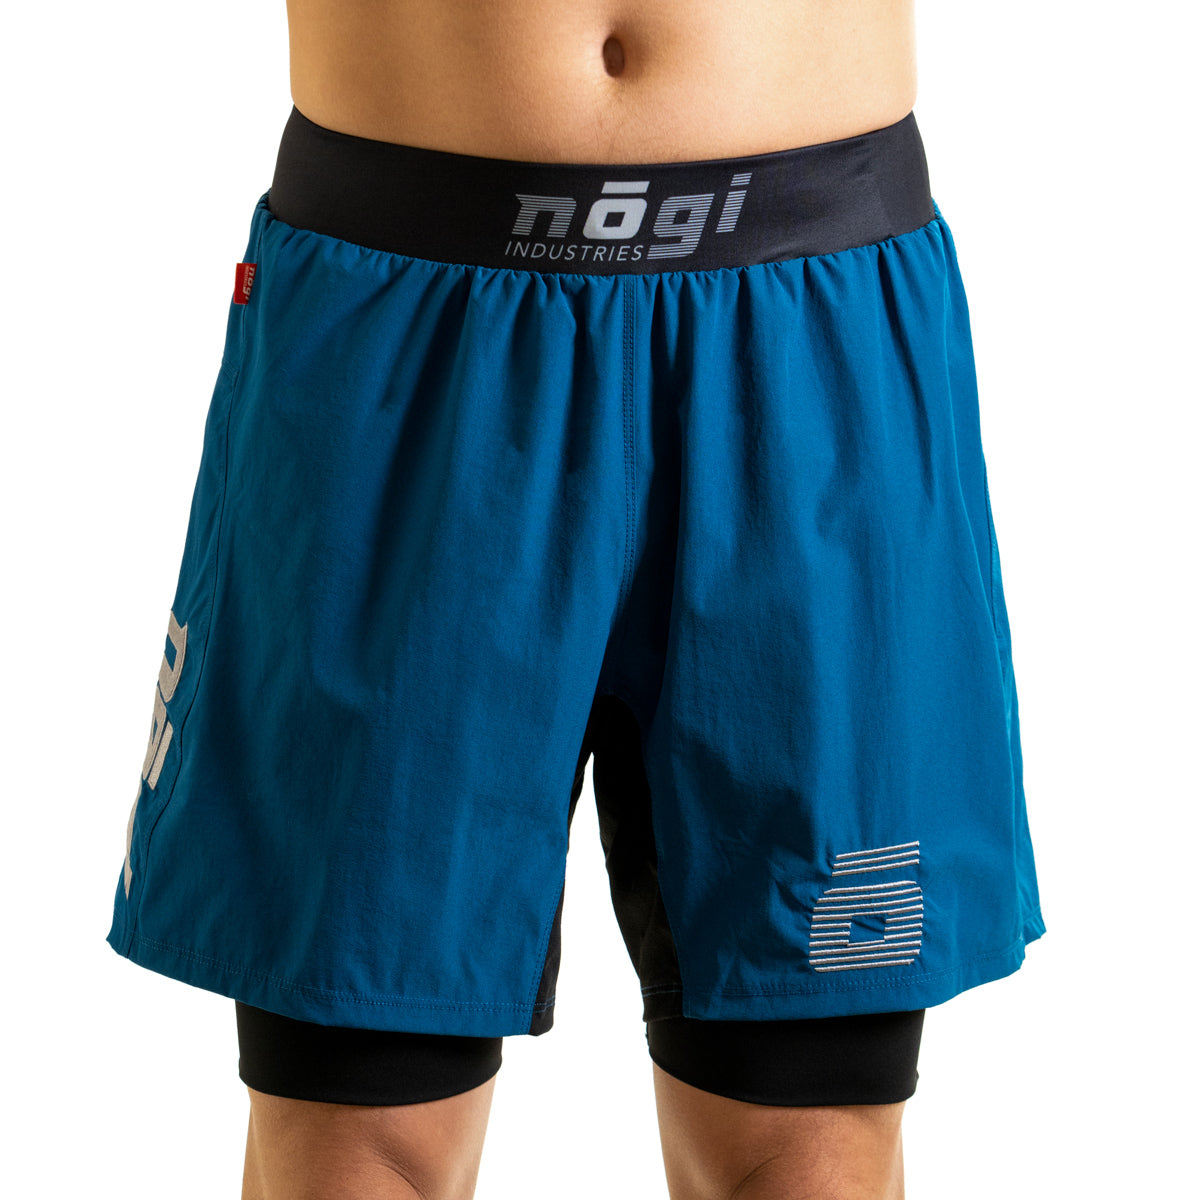 Ghost 7" Premium Lined Grappling Shorts - Ultramarine Blue Front View